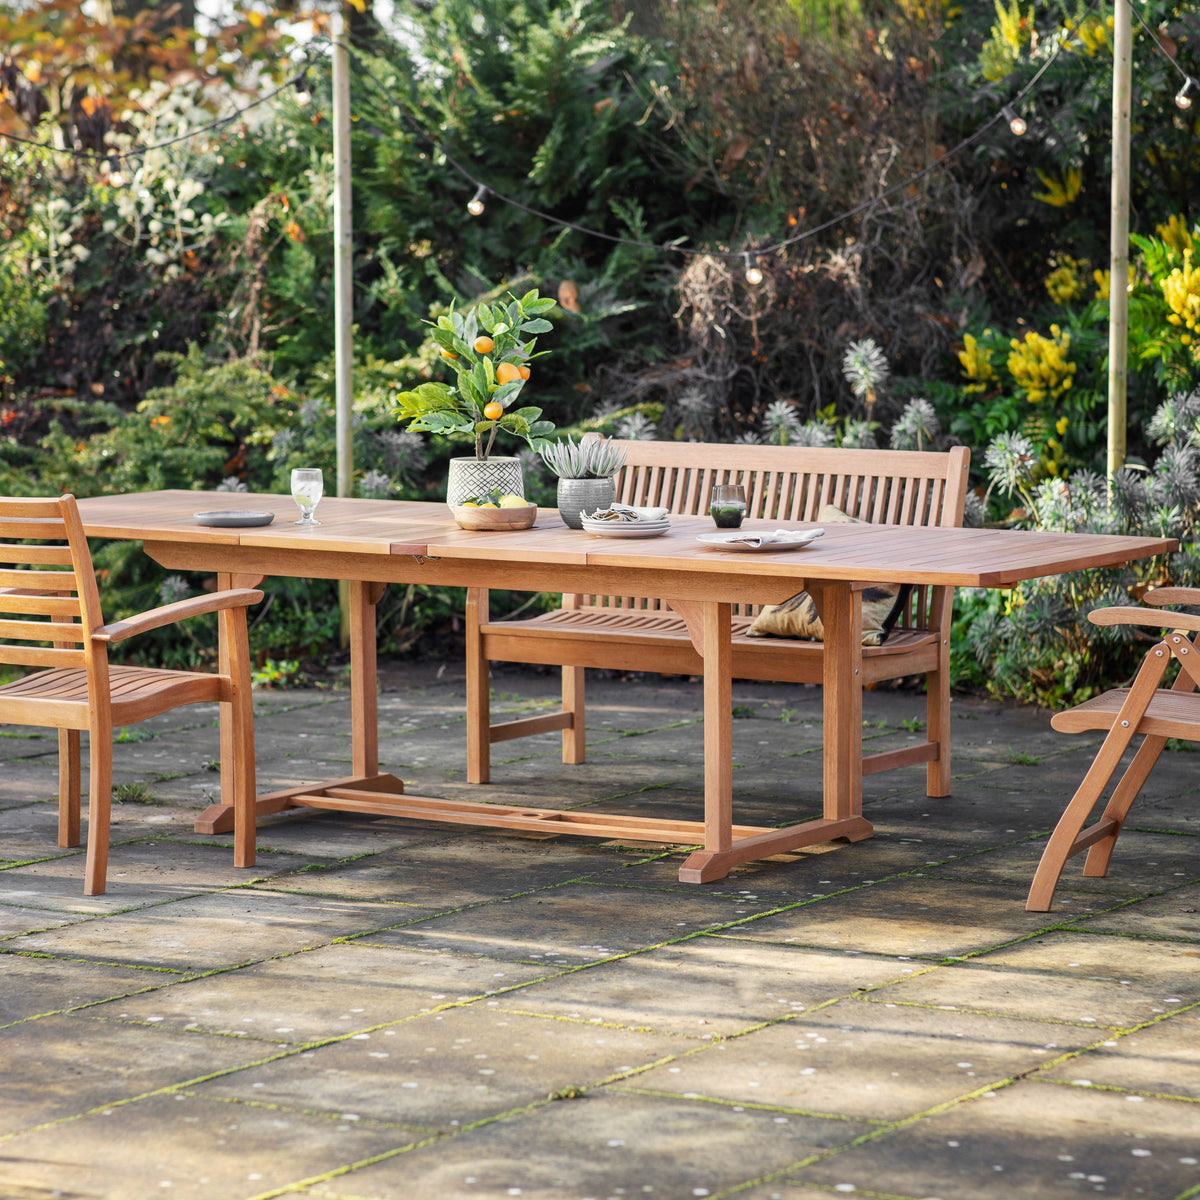 Ottoro Outdoor Extendable Dining Table - Vookoo Lifestyle